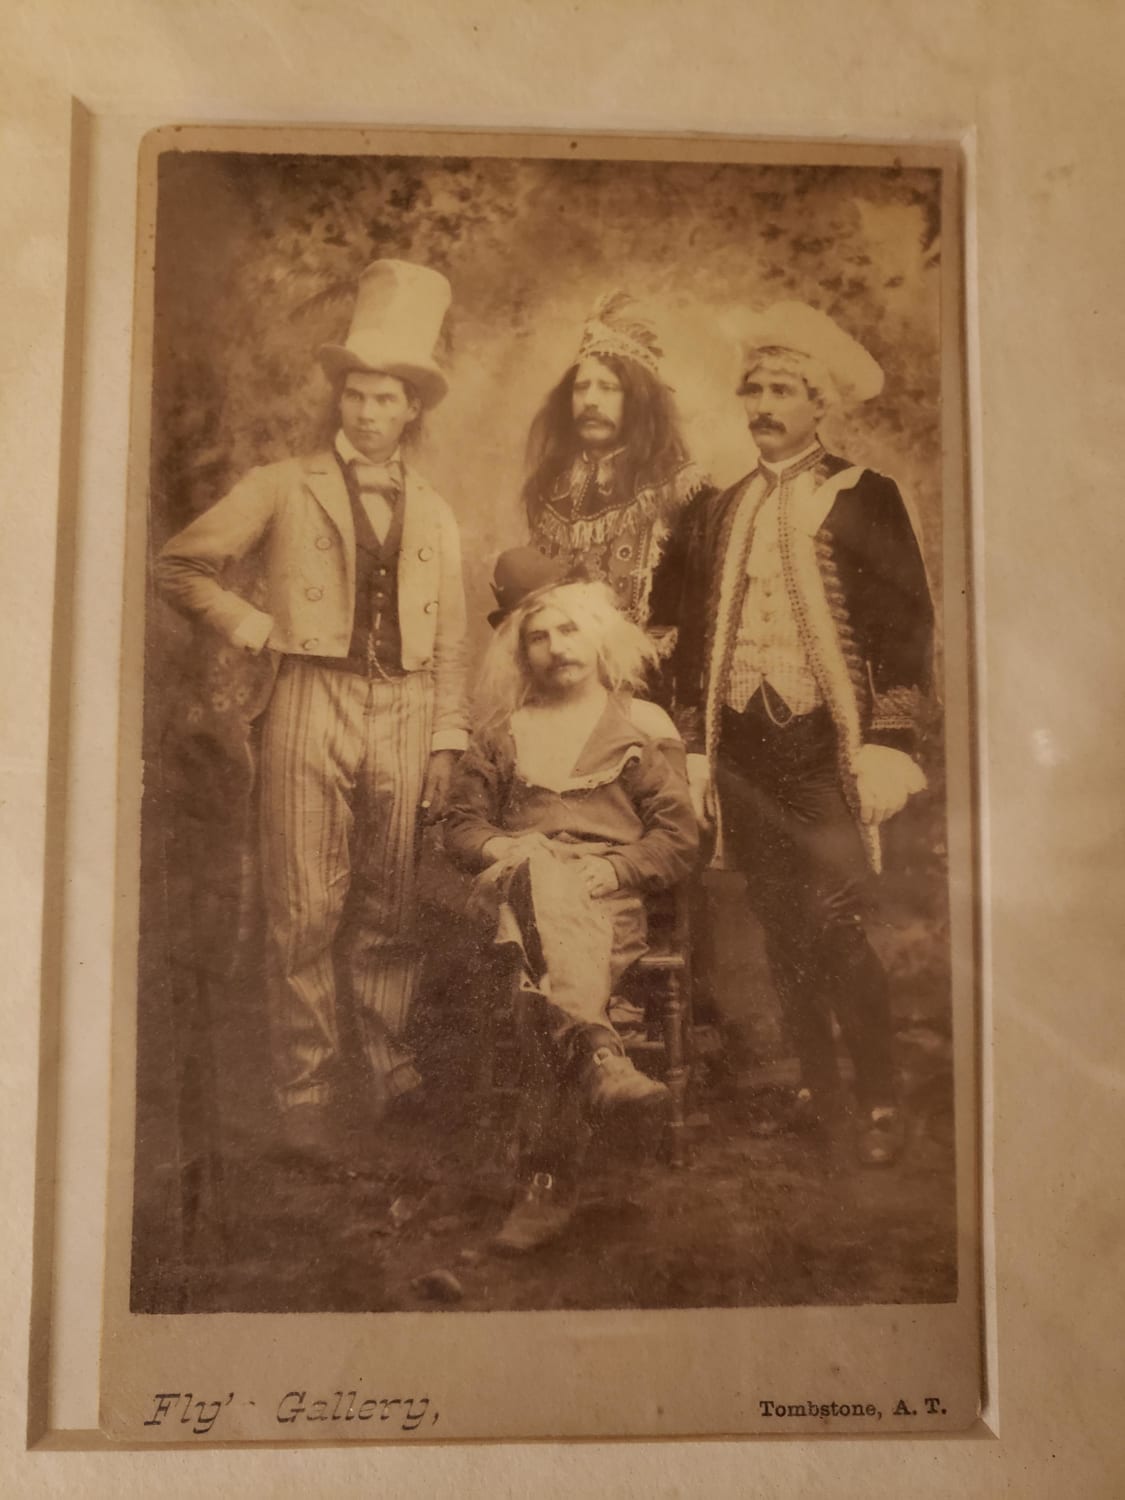 Four cowboys dressed up for a costume party? Tombstone A.T. 1880's